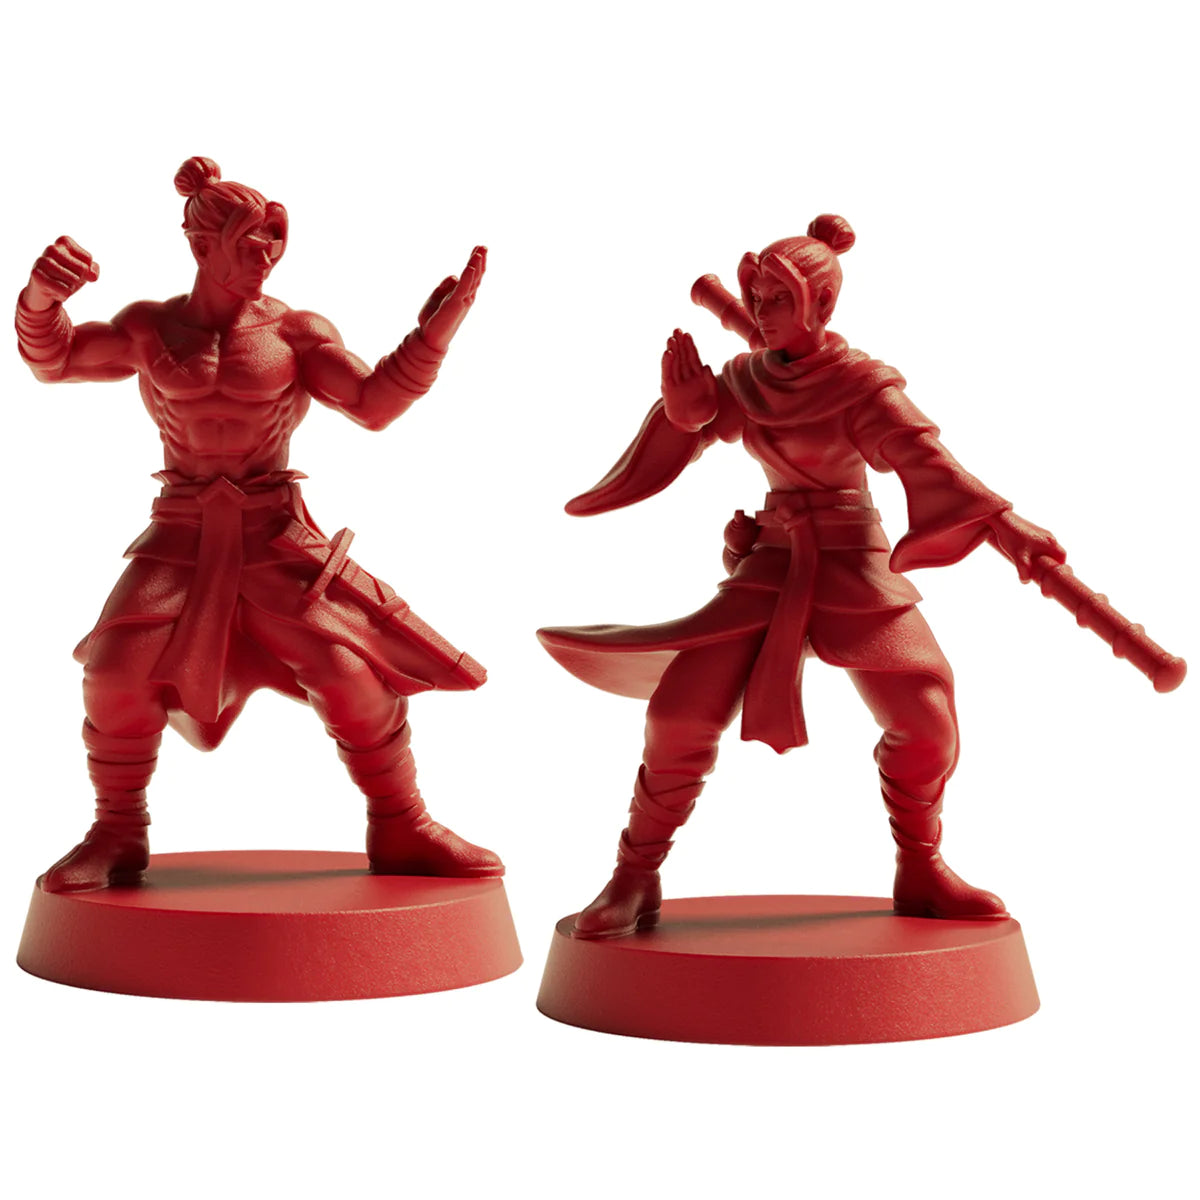 HeroQuest: Path of The Wandering Monk - Loaded Dice